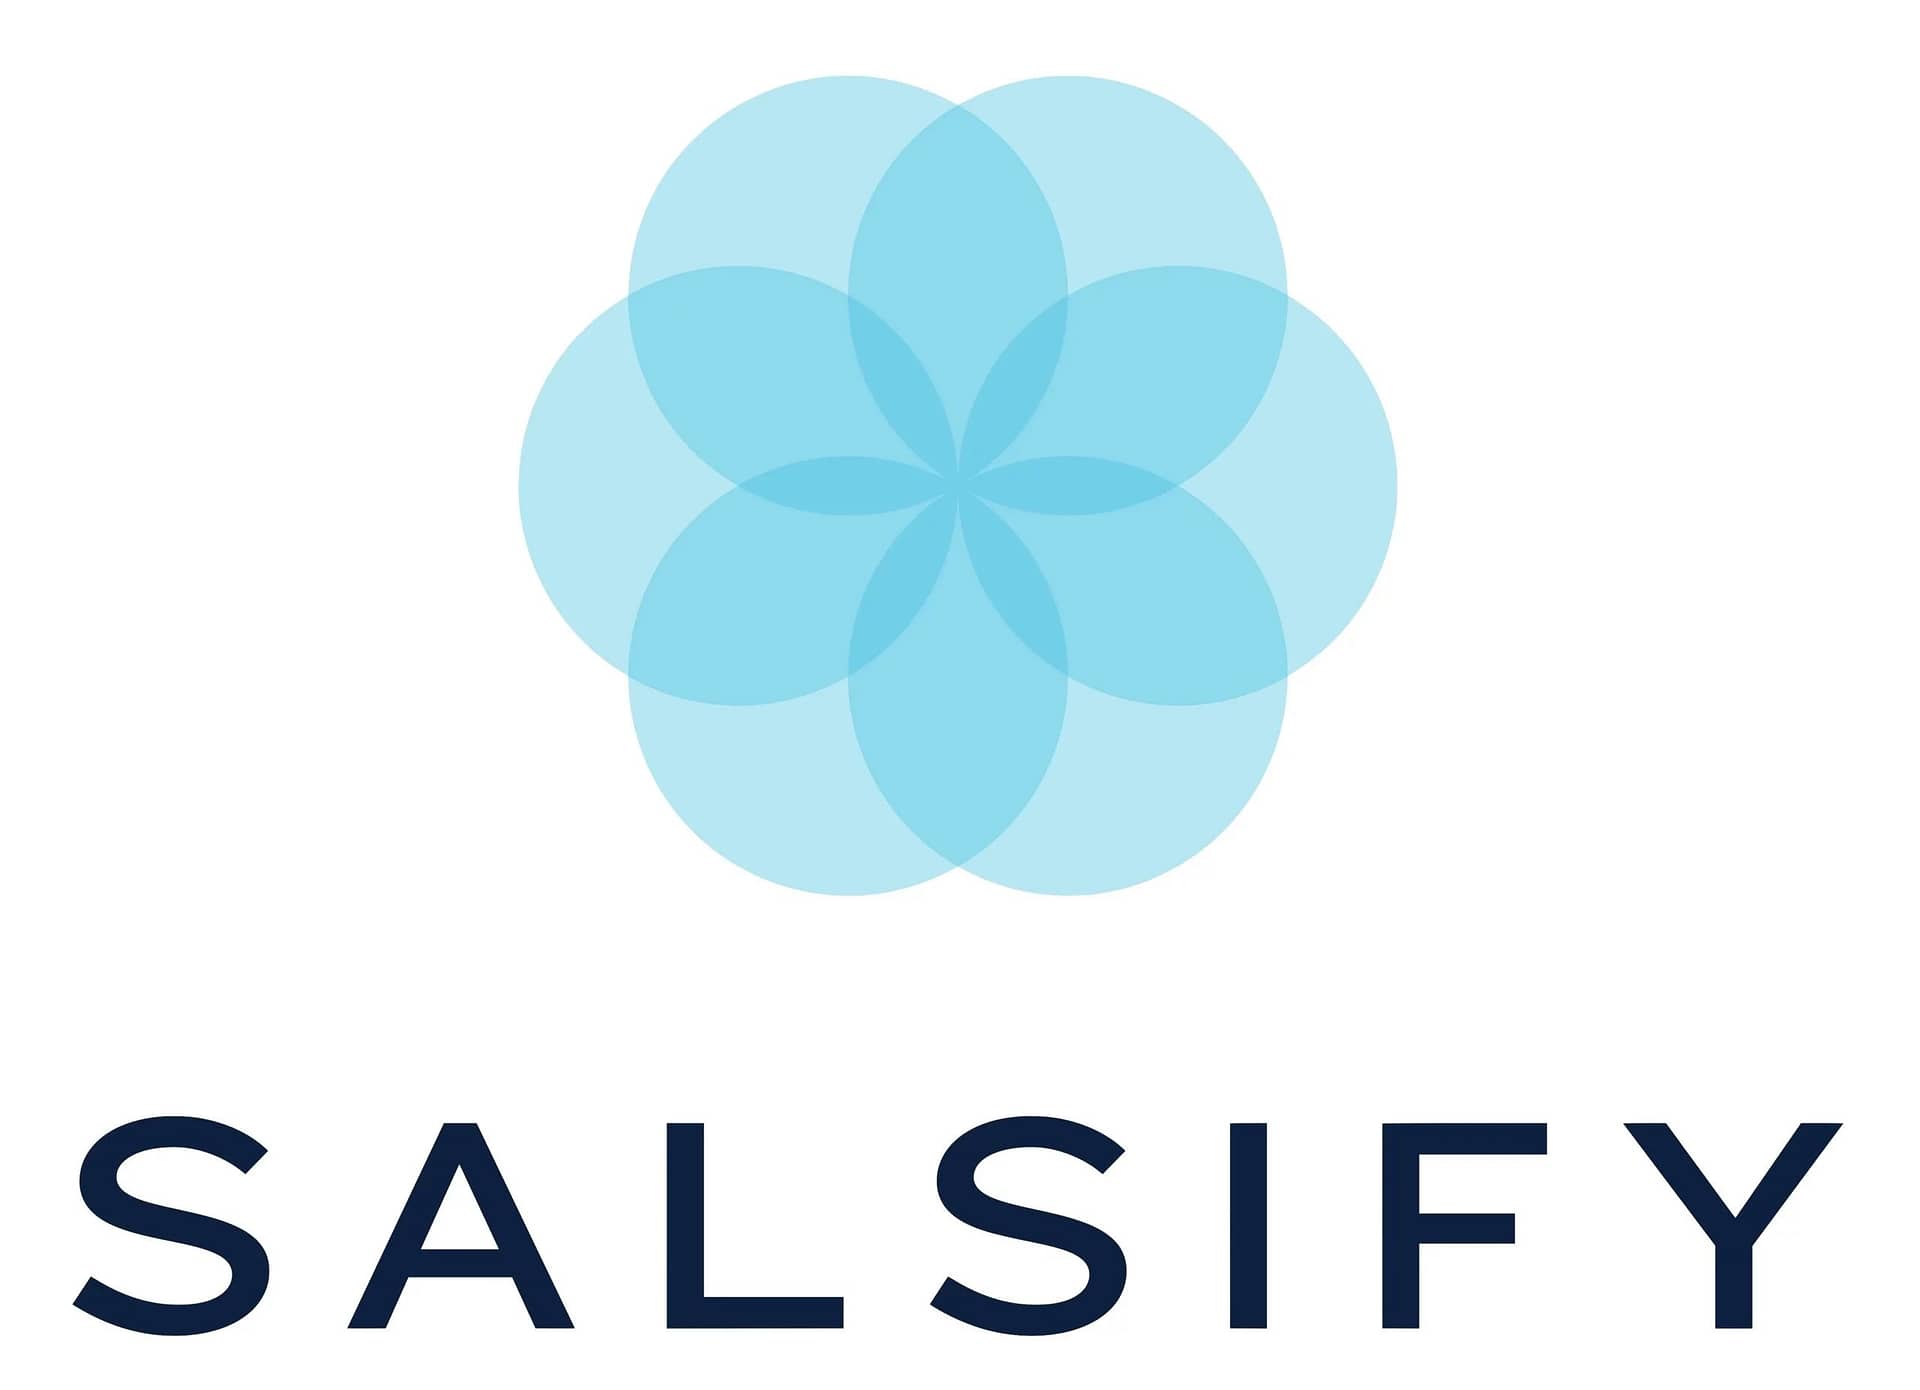 Salsify is a product experience management tool that allows brands to create the product experiences their customers want, across every channel said customer might shop. It does this by providing its users with a variety of top-notch software tools.